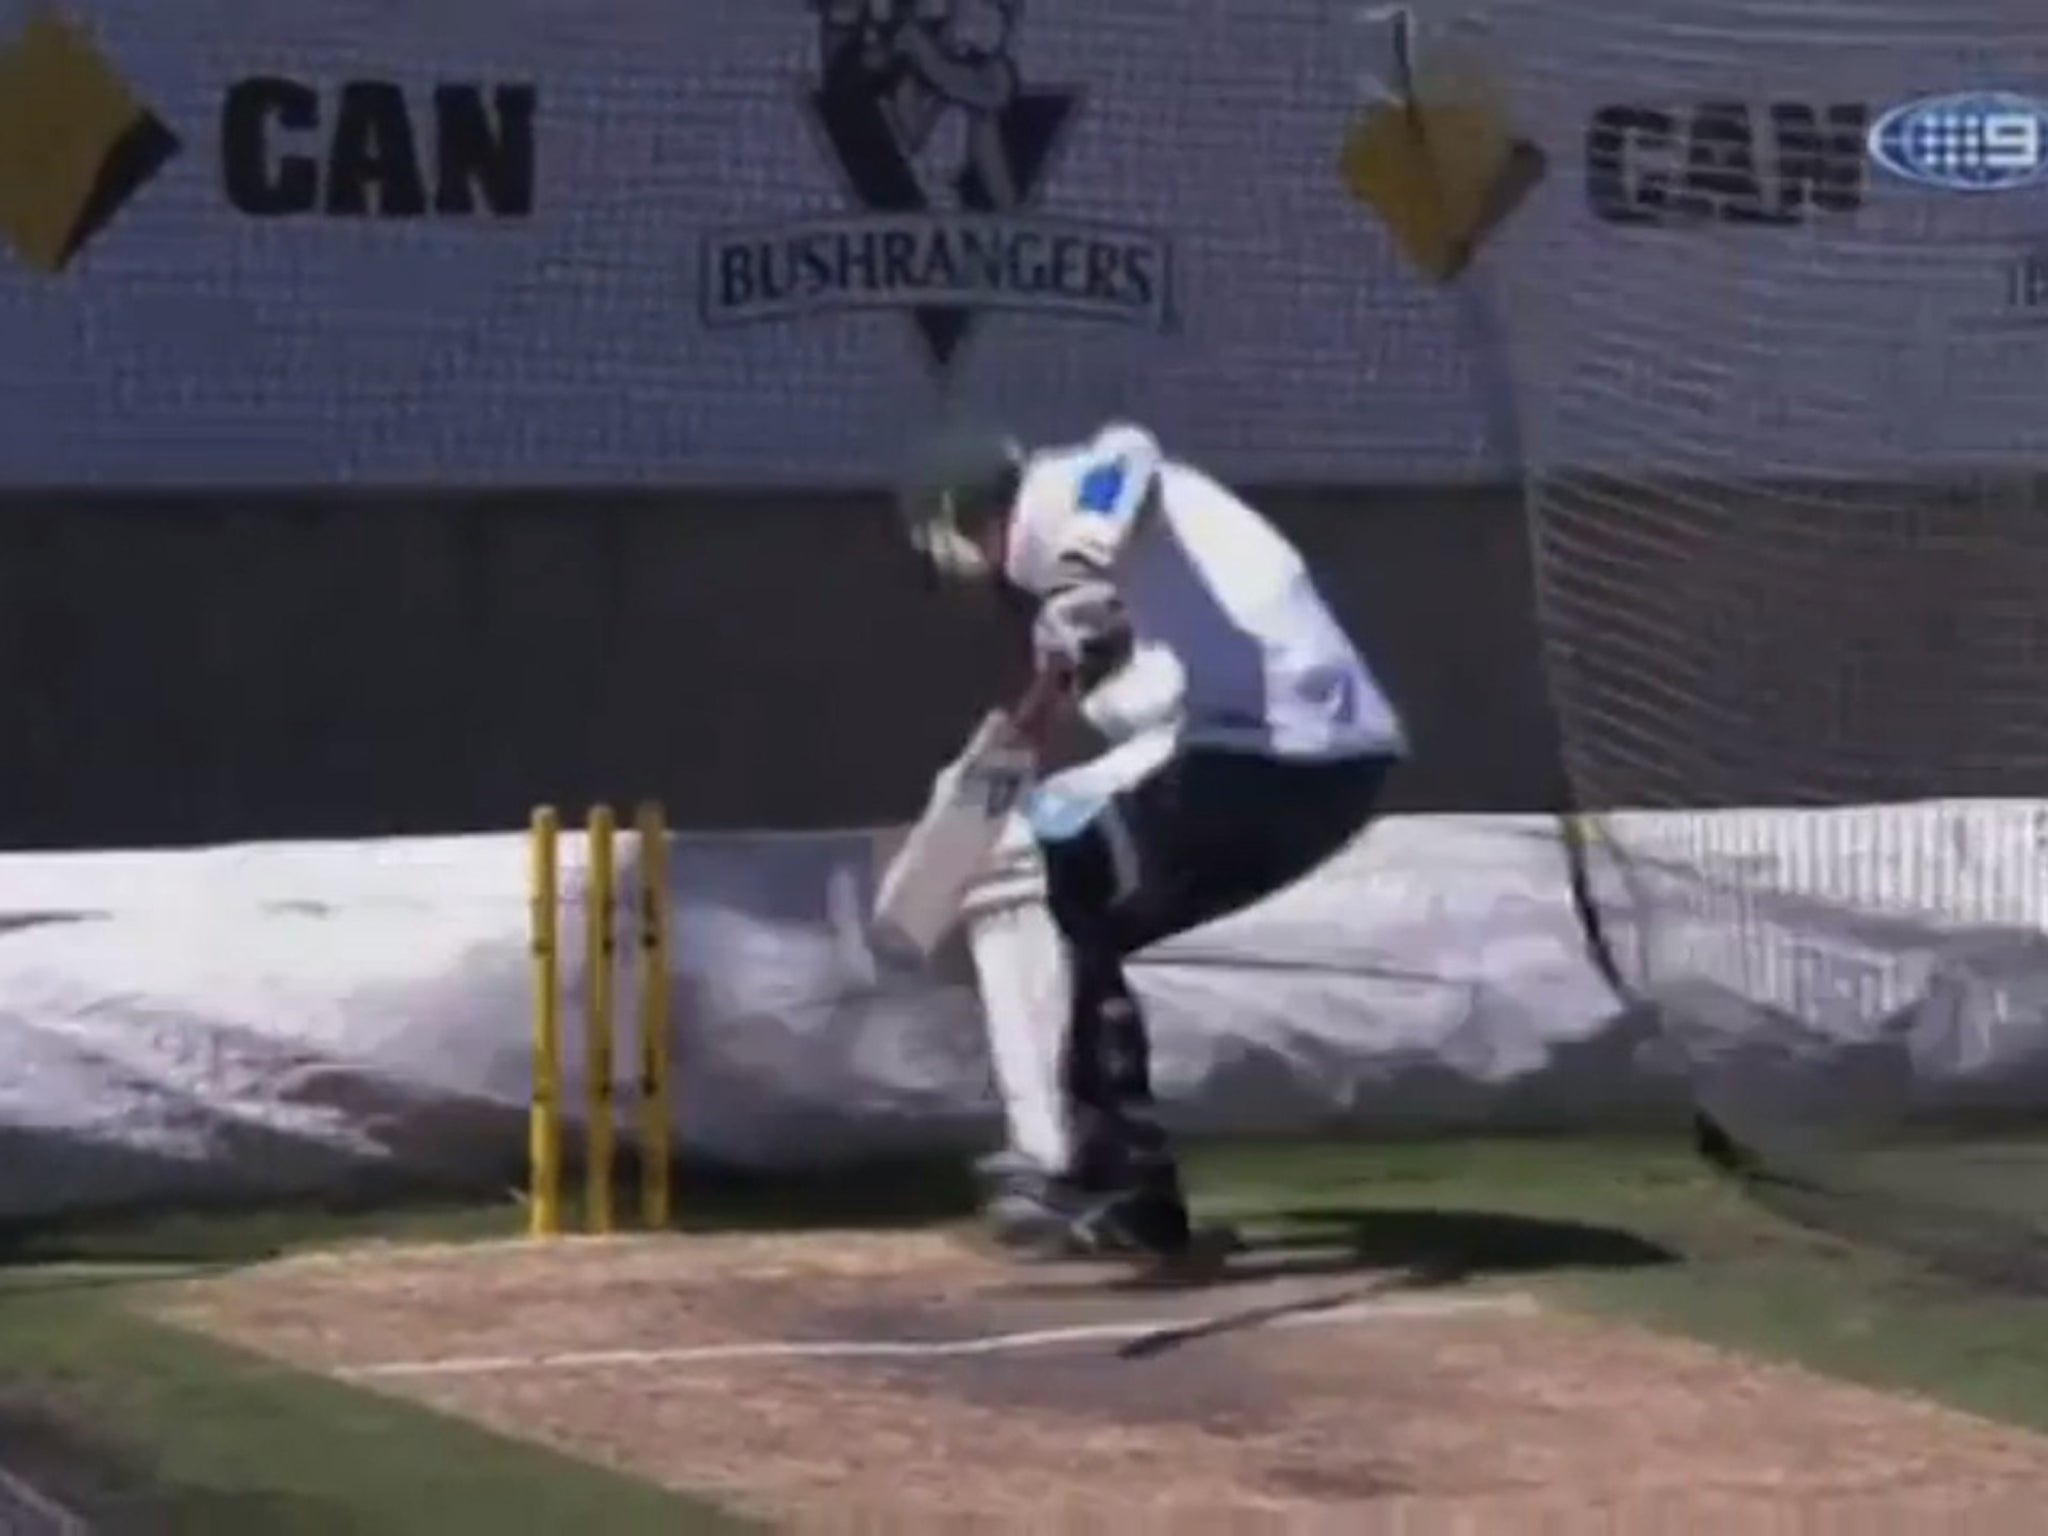 Piers Morgan attempts to avoid a Brett Lee bouncer aimed at his head, with little success